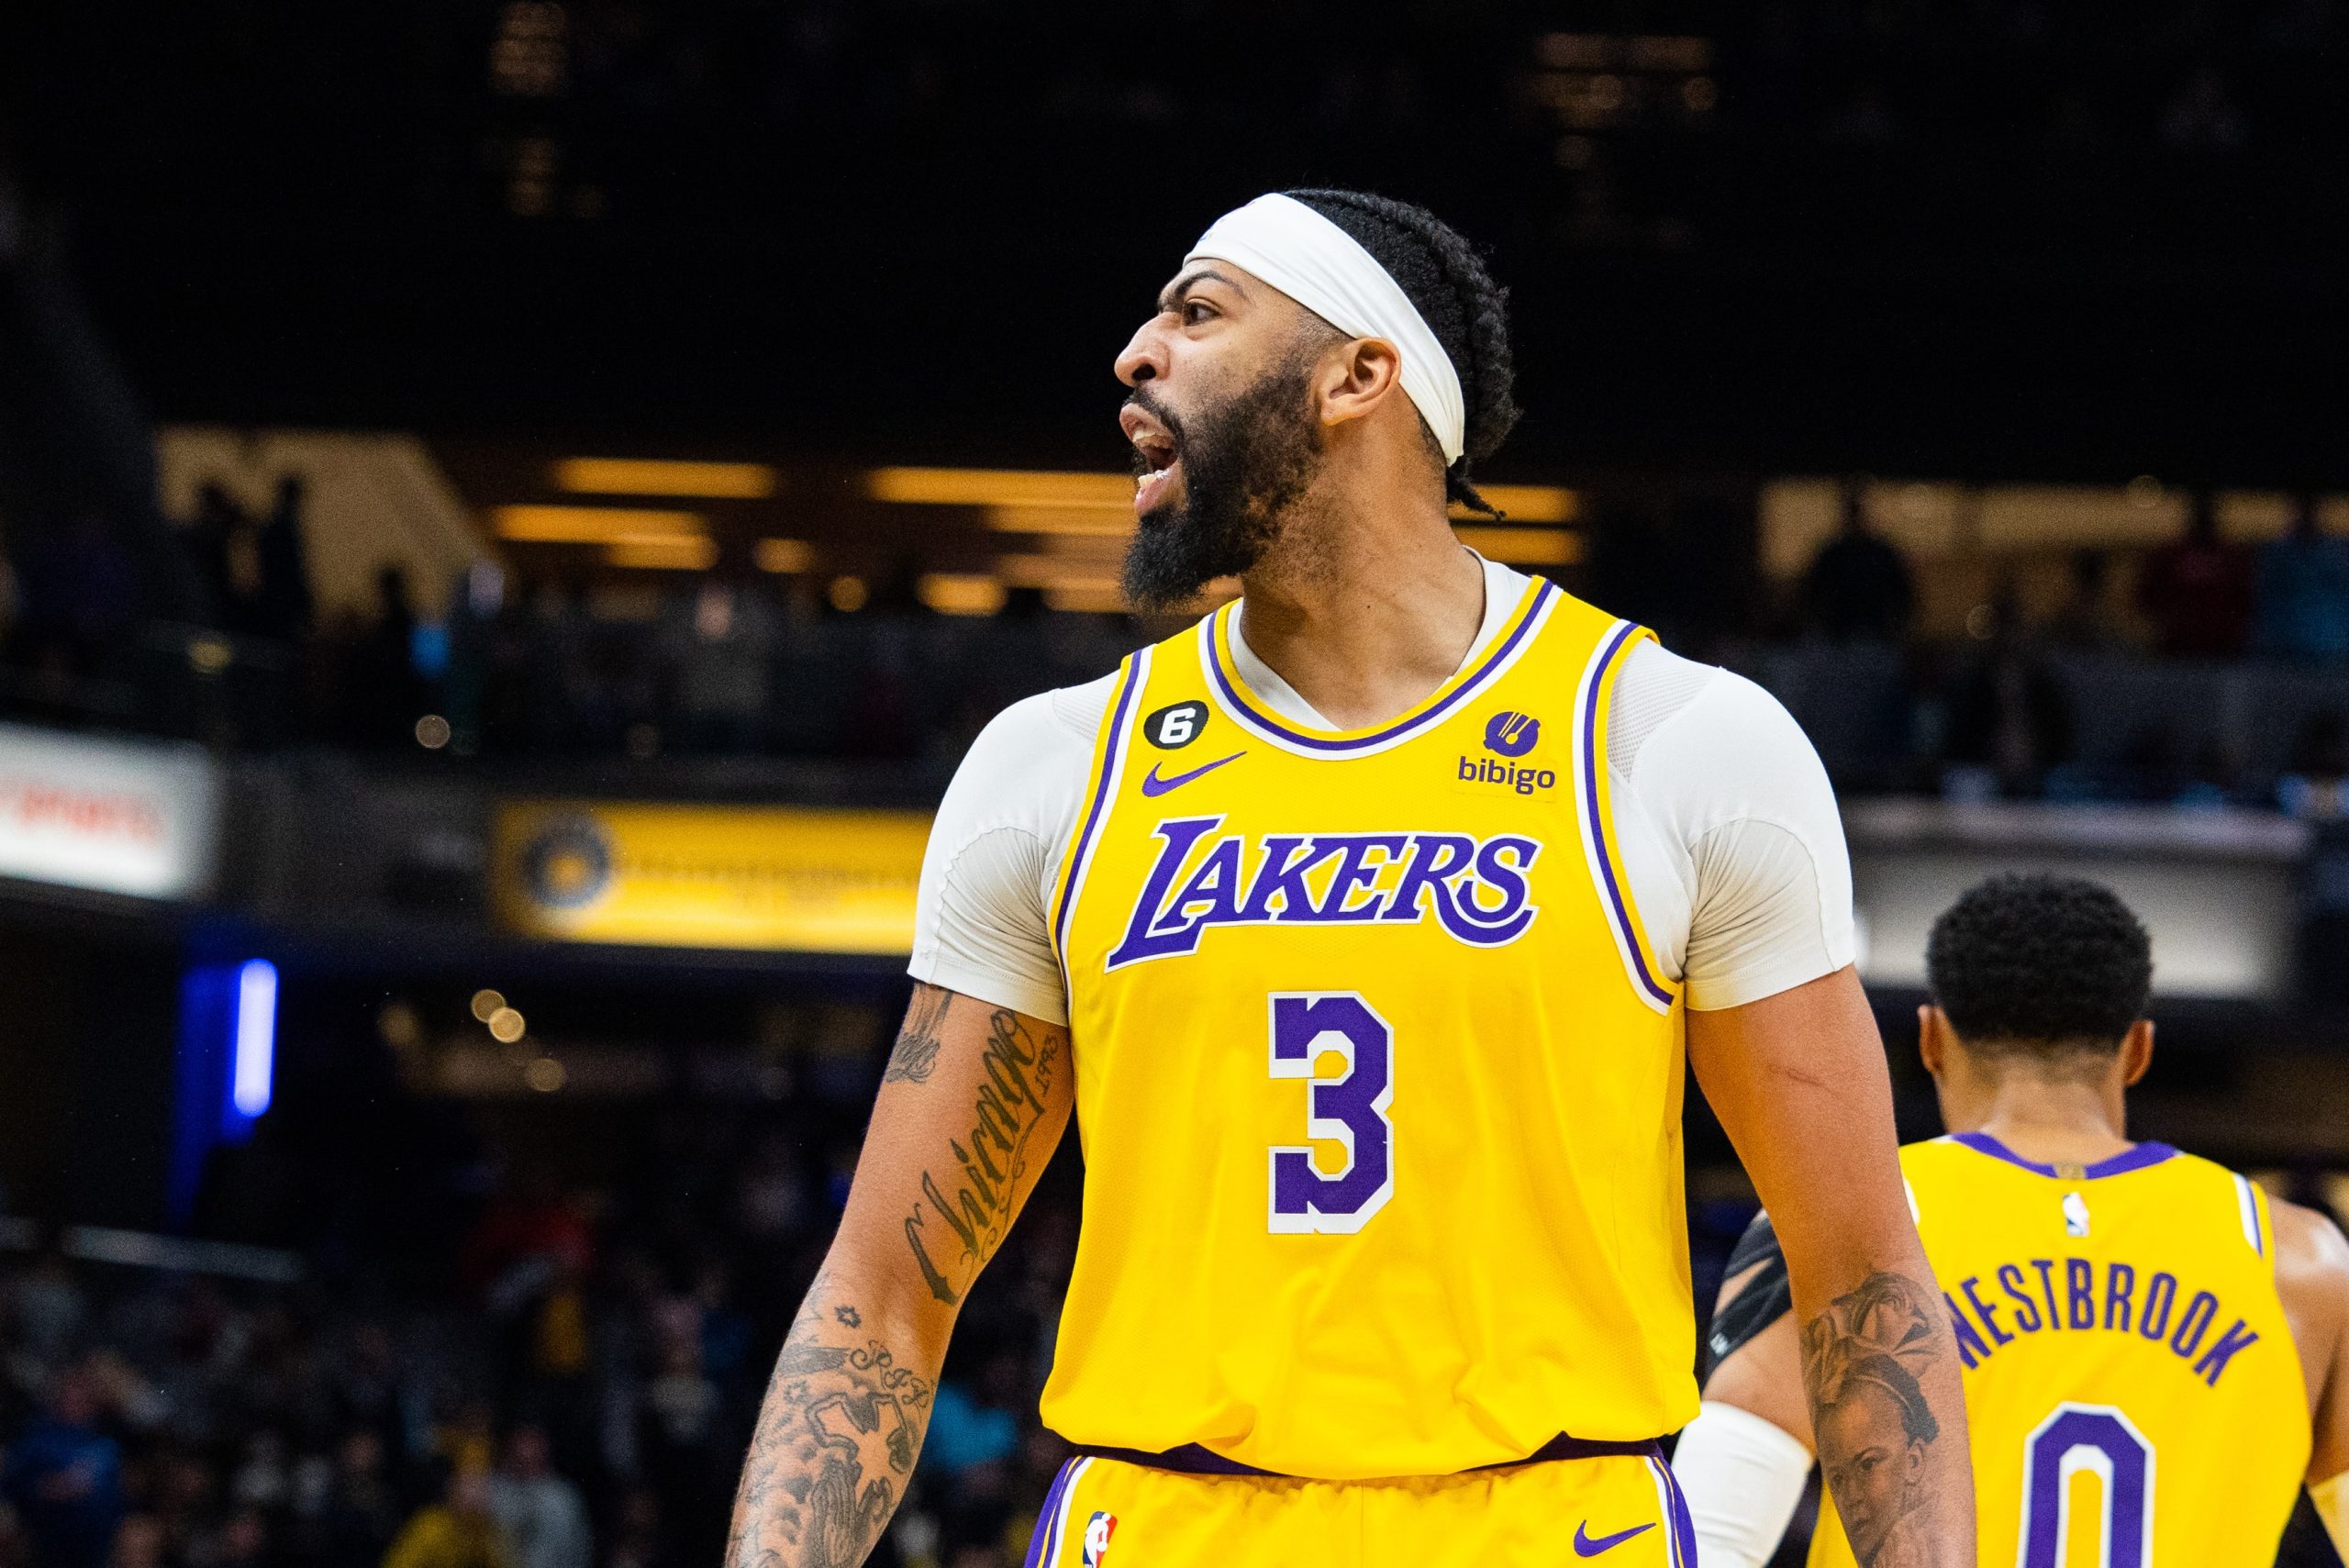 Lakers vs Wizards Prediction, Betting Odds, H2H, Money Line, Live Stream,  Live Score and How to Watch